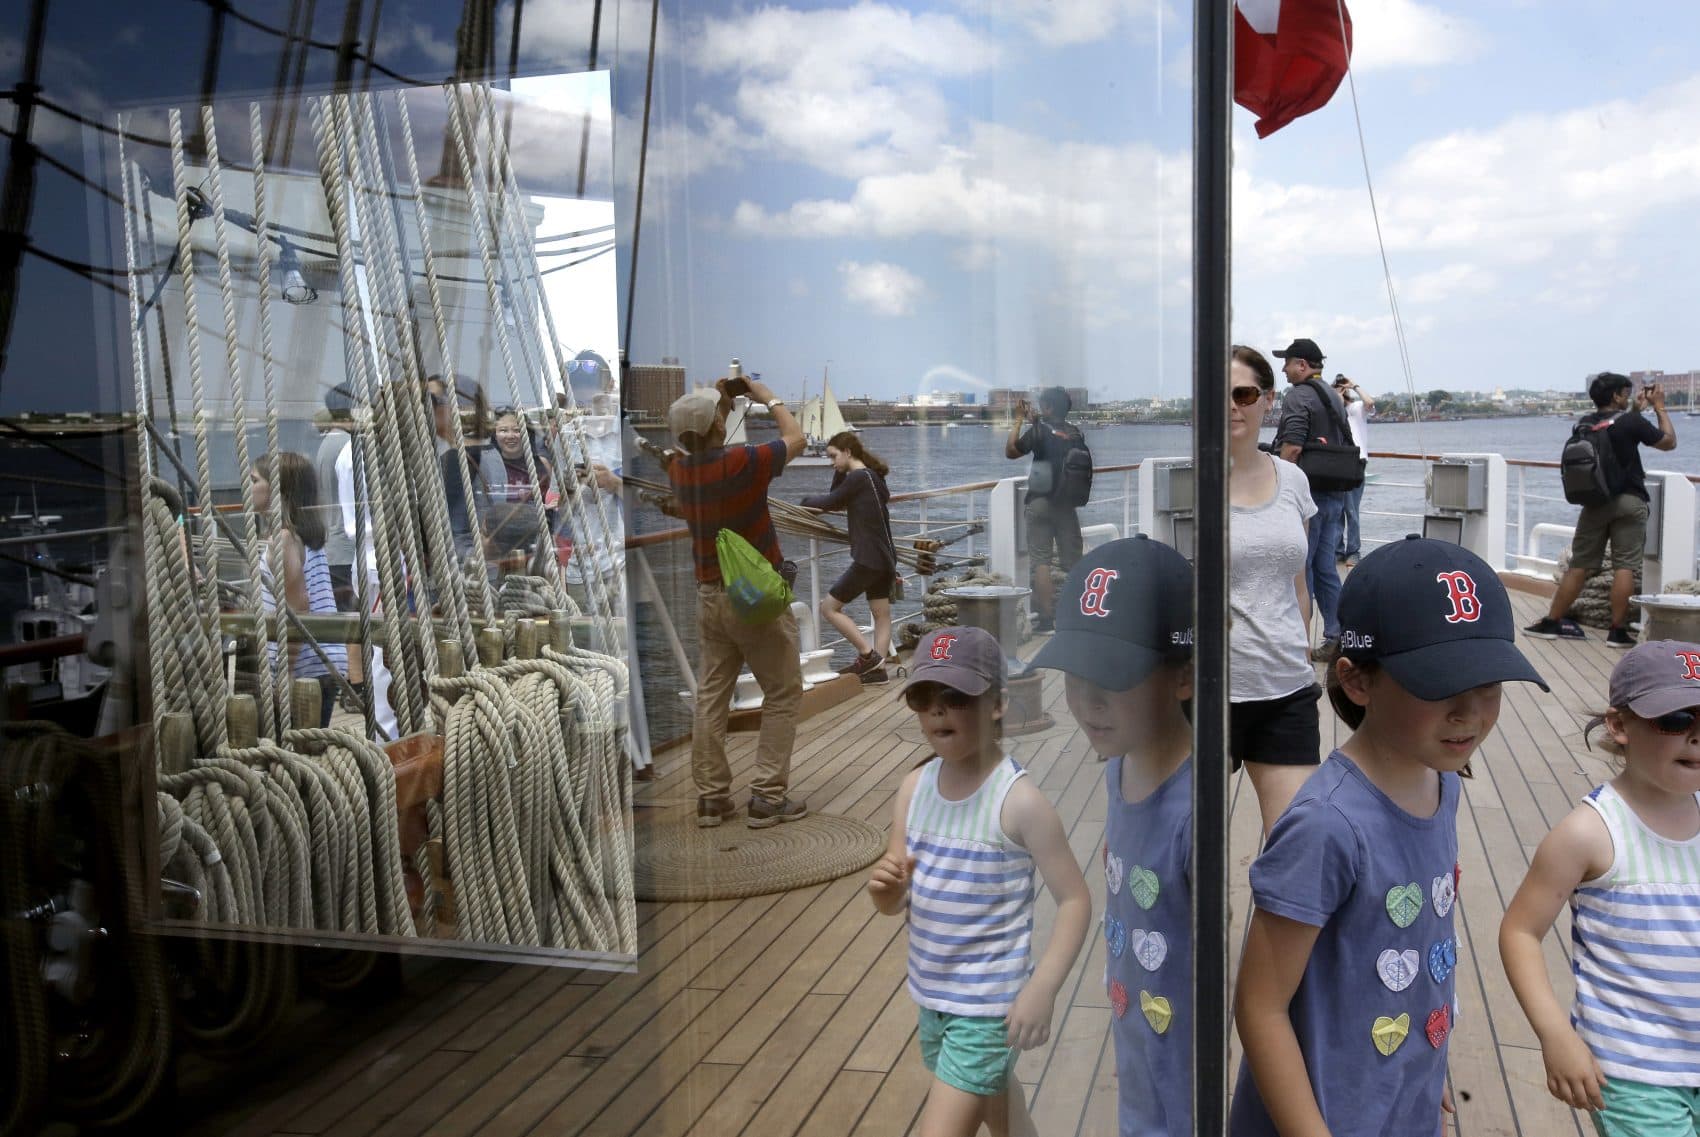 Visitors walk along a deck on the Peruvian Navy tall ship Union as part of the Sail Boston event on Sunday. (Steven Senne/AP)